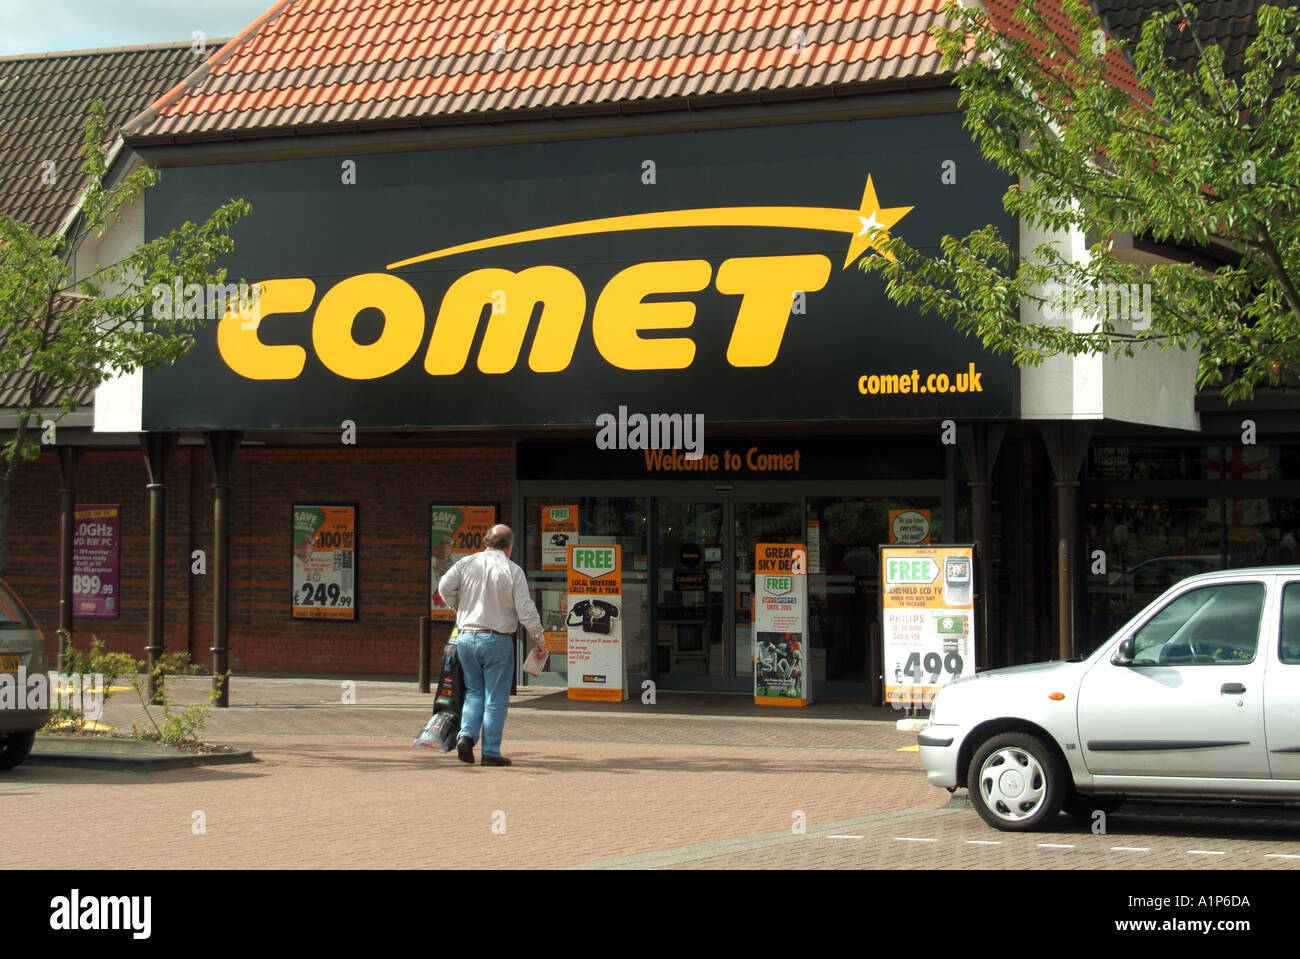 Chelmsford Chelmer Village retail park Comet electrical store Stock Photo